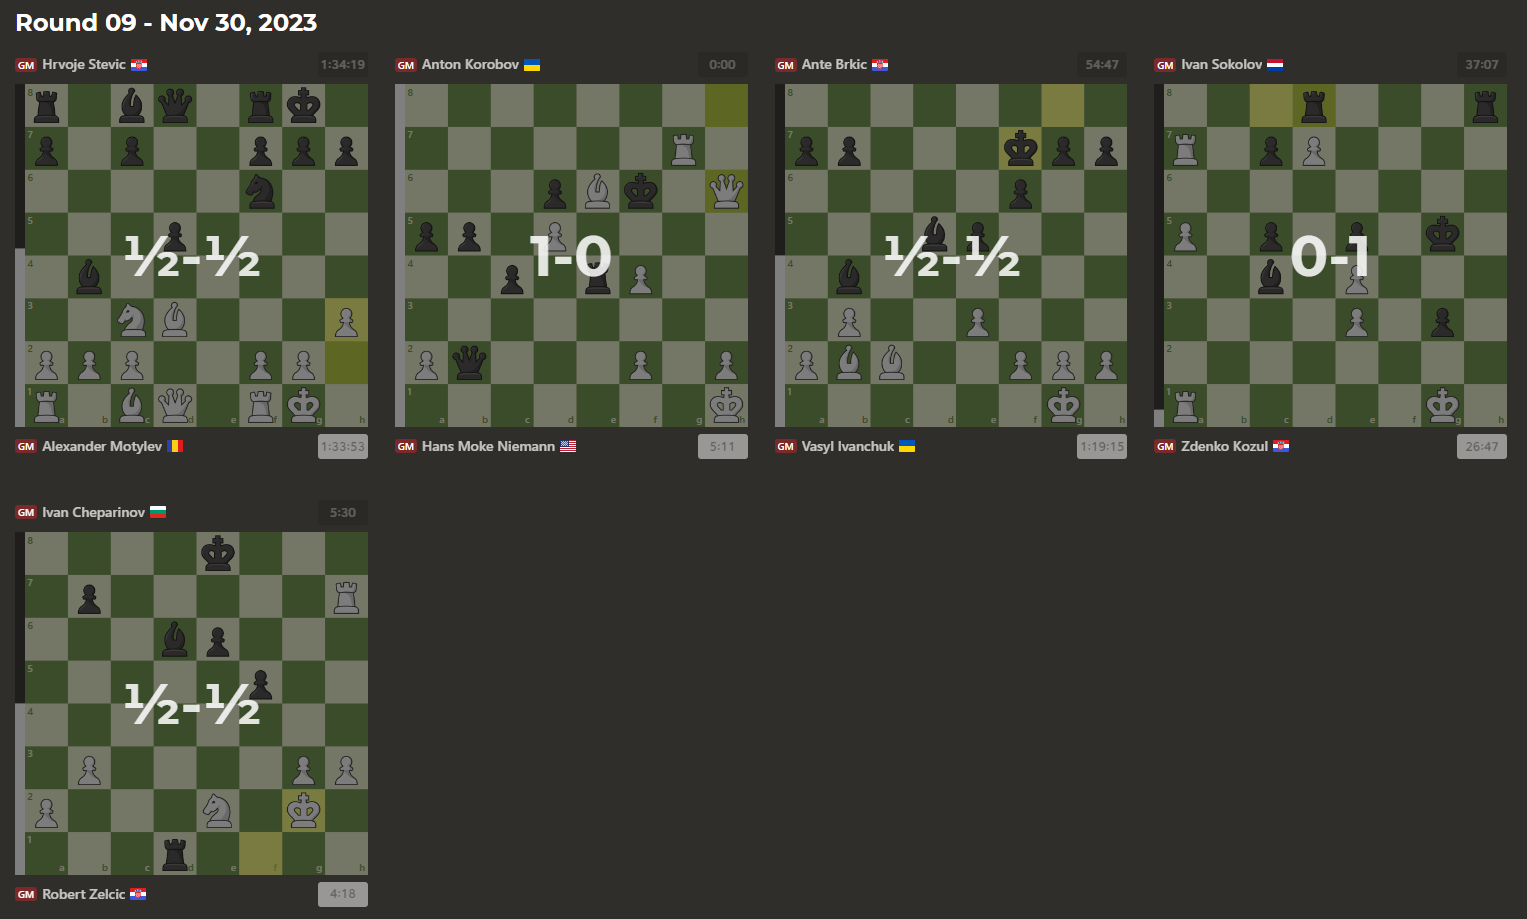 Hans Niemann crushes Ivan Sokolov to move to 6.5/7 at the Tournament of  Peace and to 2689 in the live ratings : r/chess